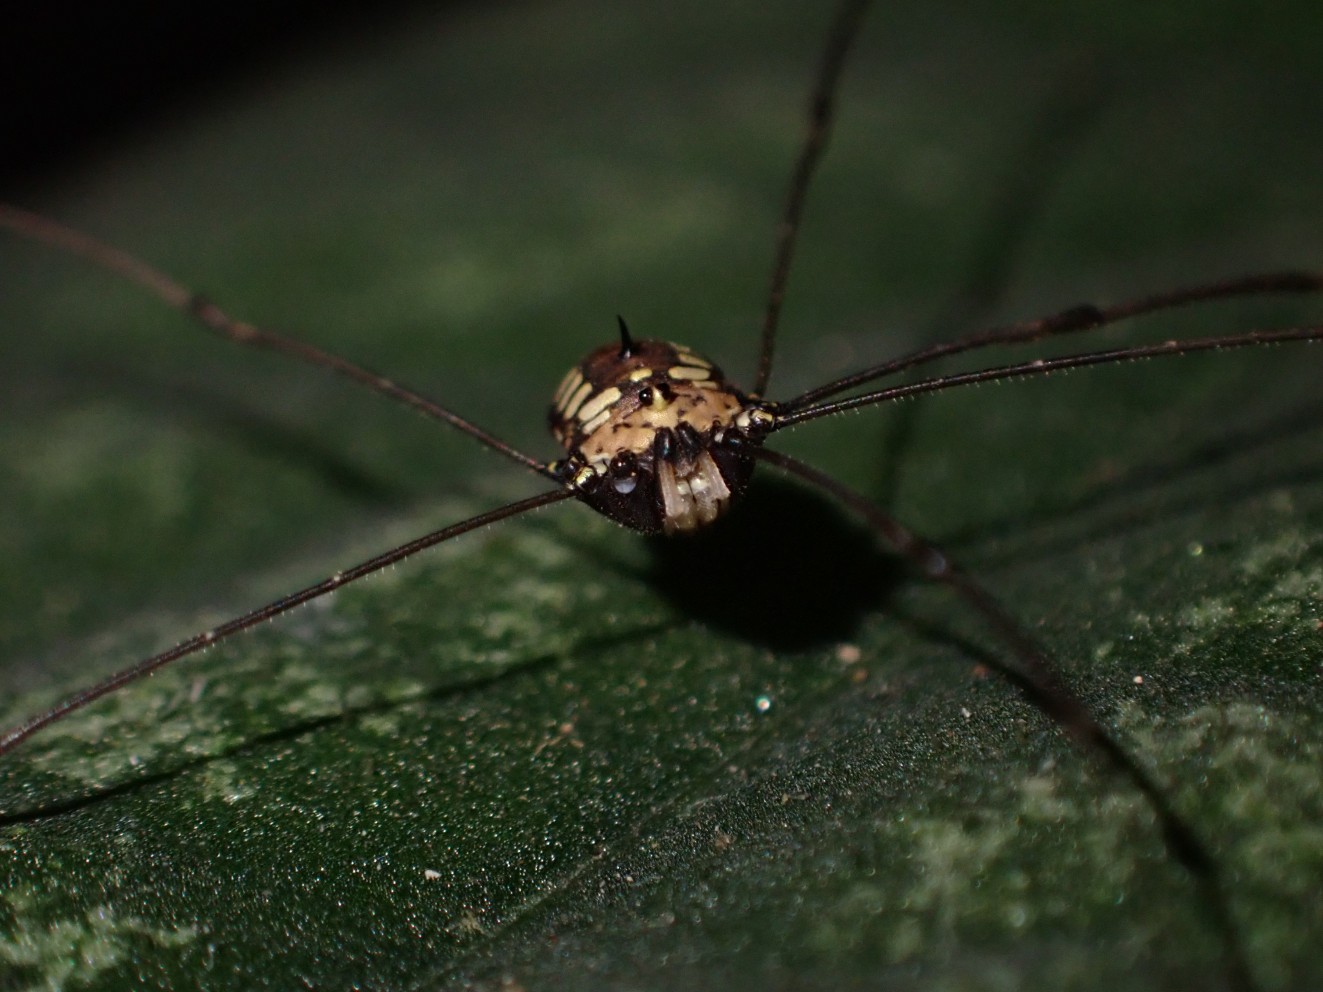 Lingnan’s MPhil student of environmental science intends to contribute to knowledge of the biodiversity of harvestmen in Hong Kong. Photo courtesy: Desmond Tan Kai-teck